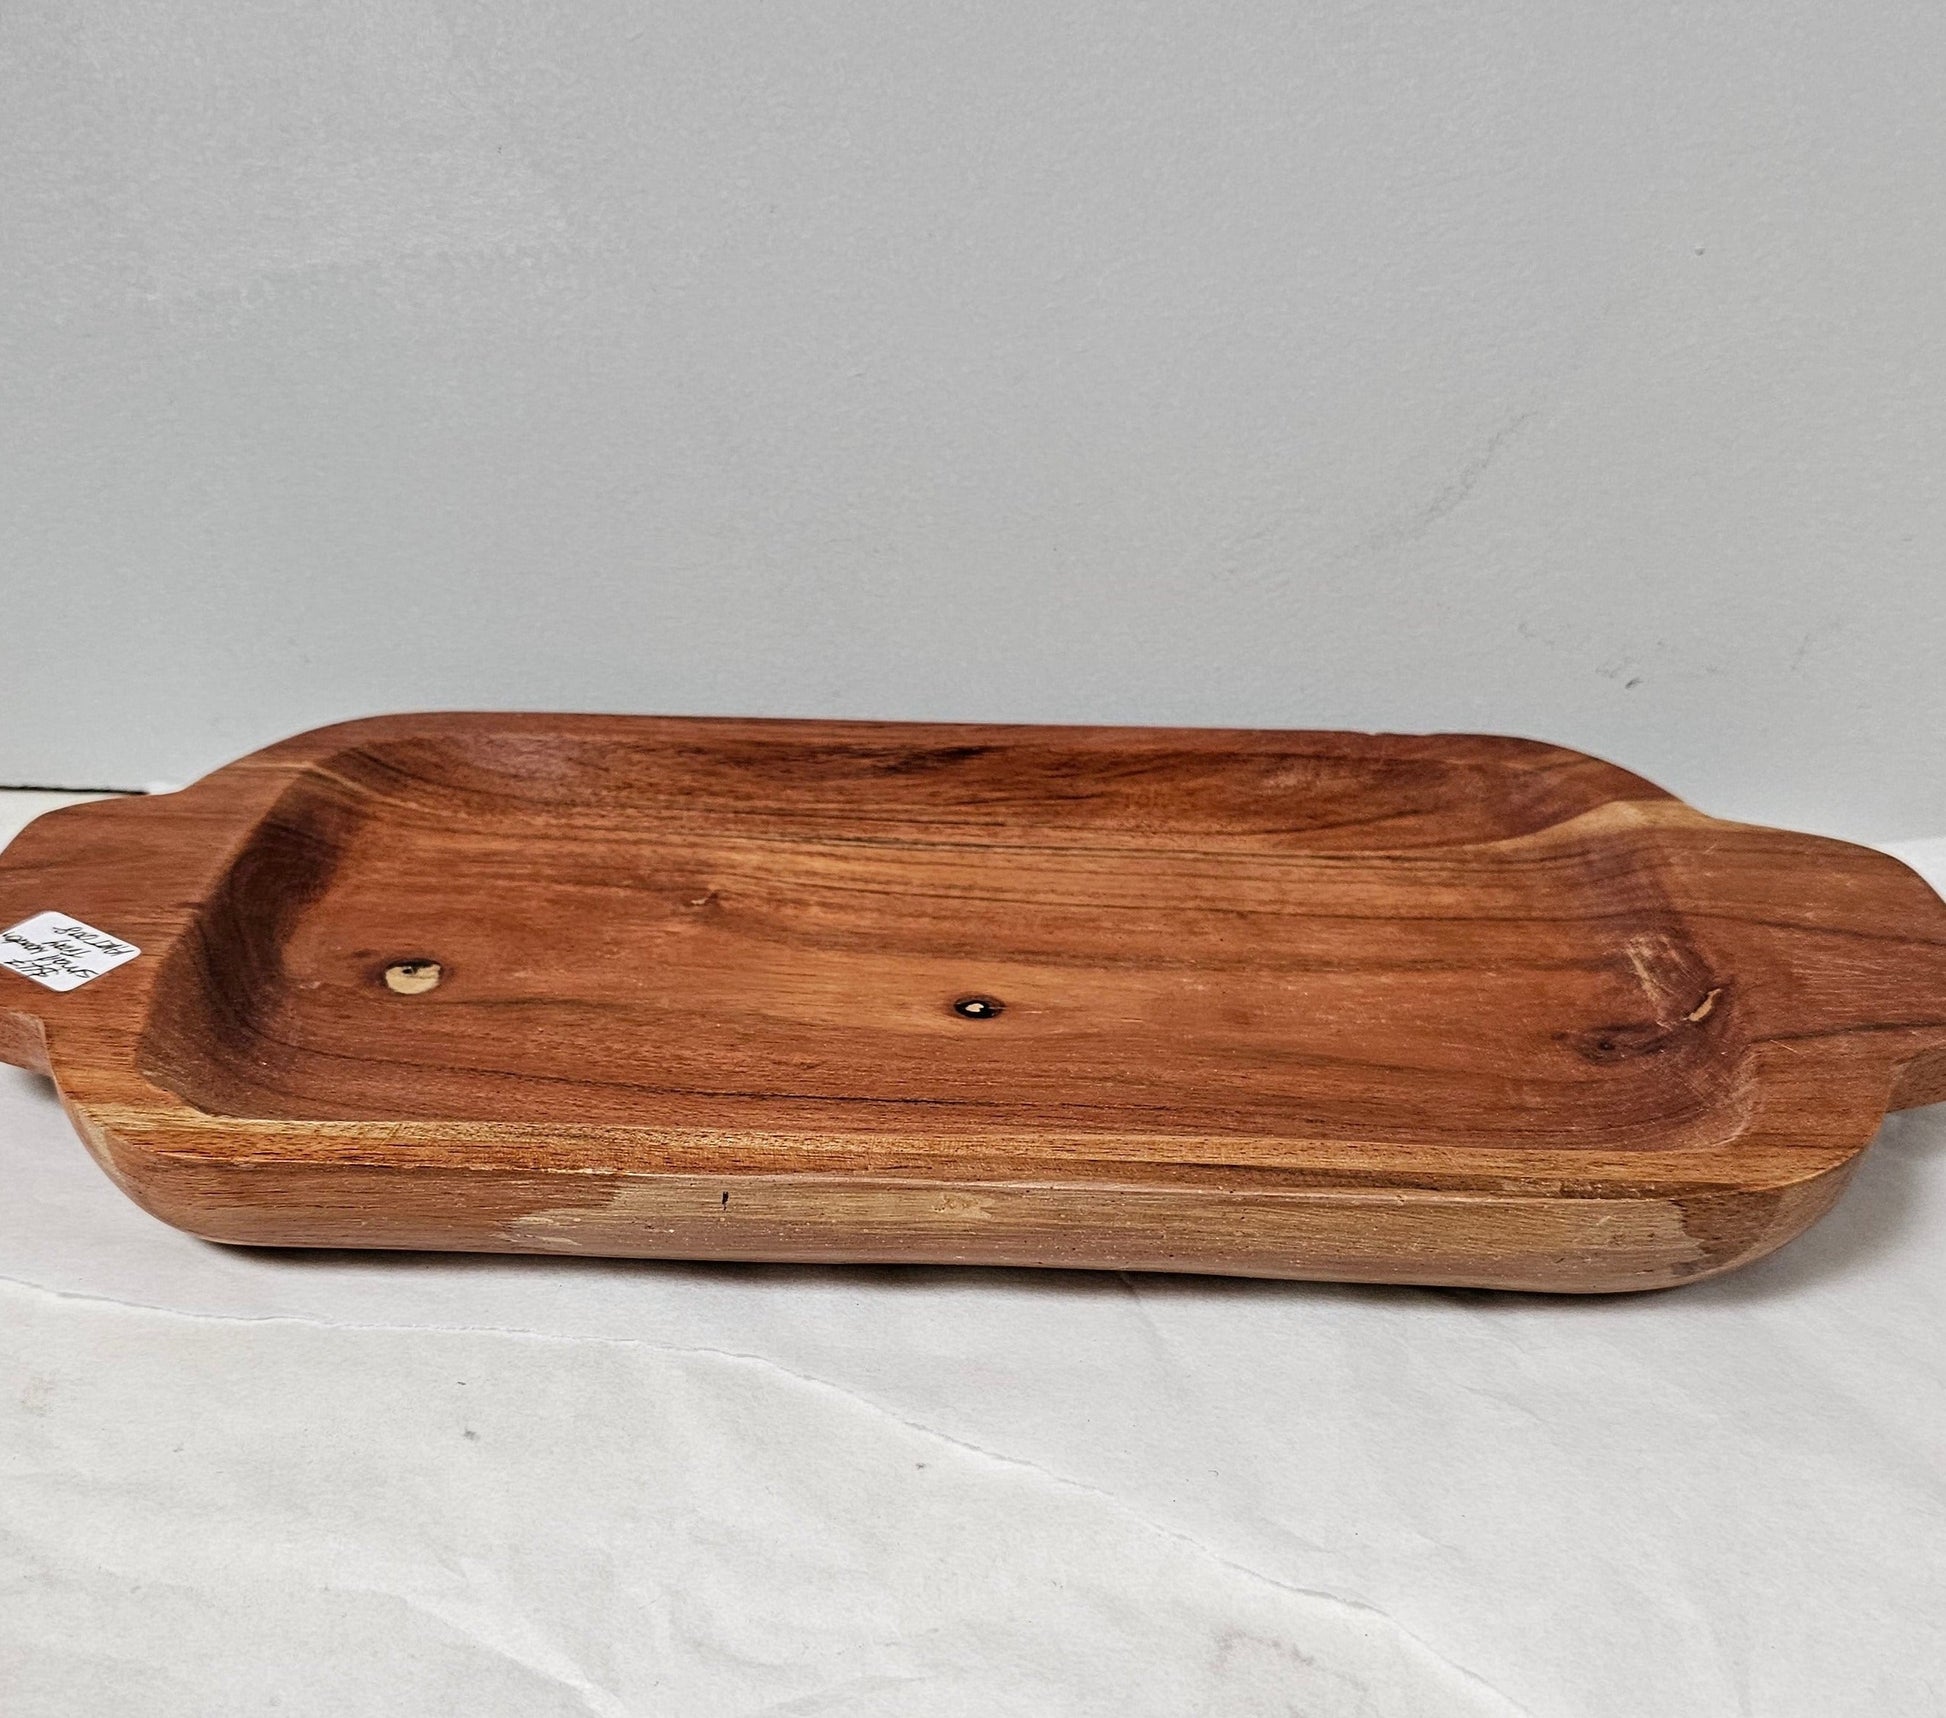 Beautiful turned wooden tray, small size